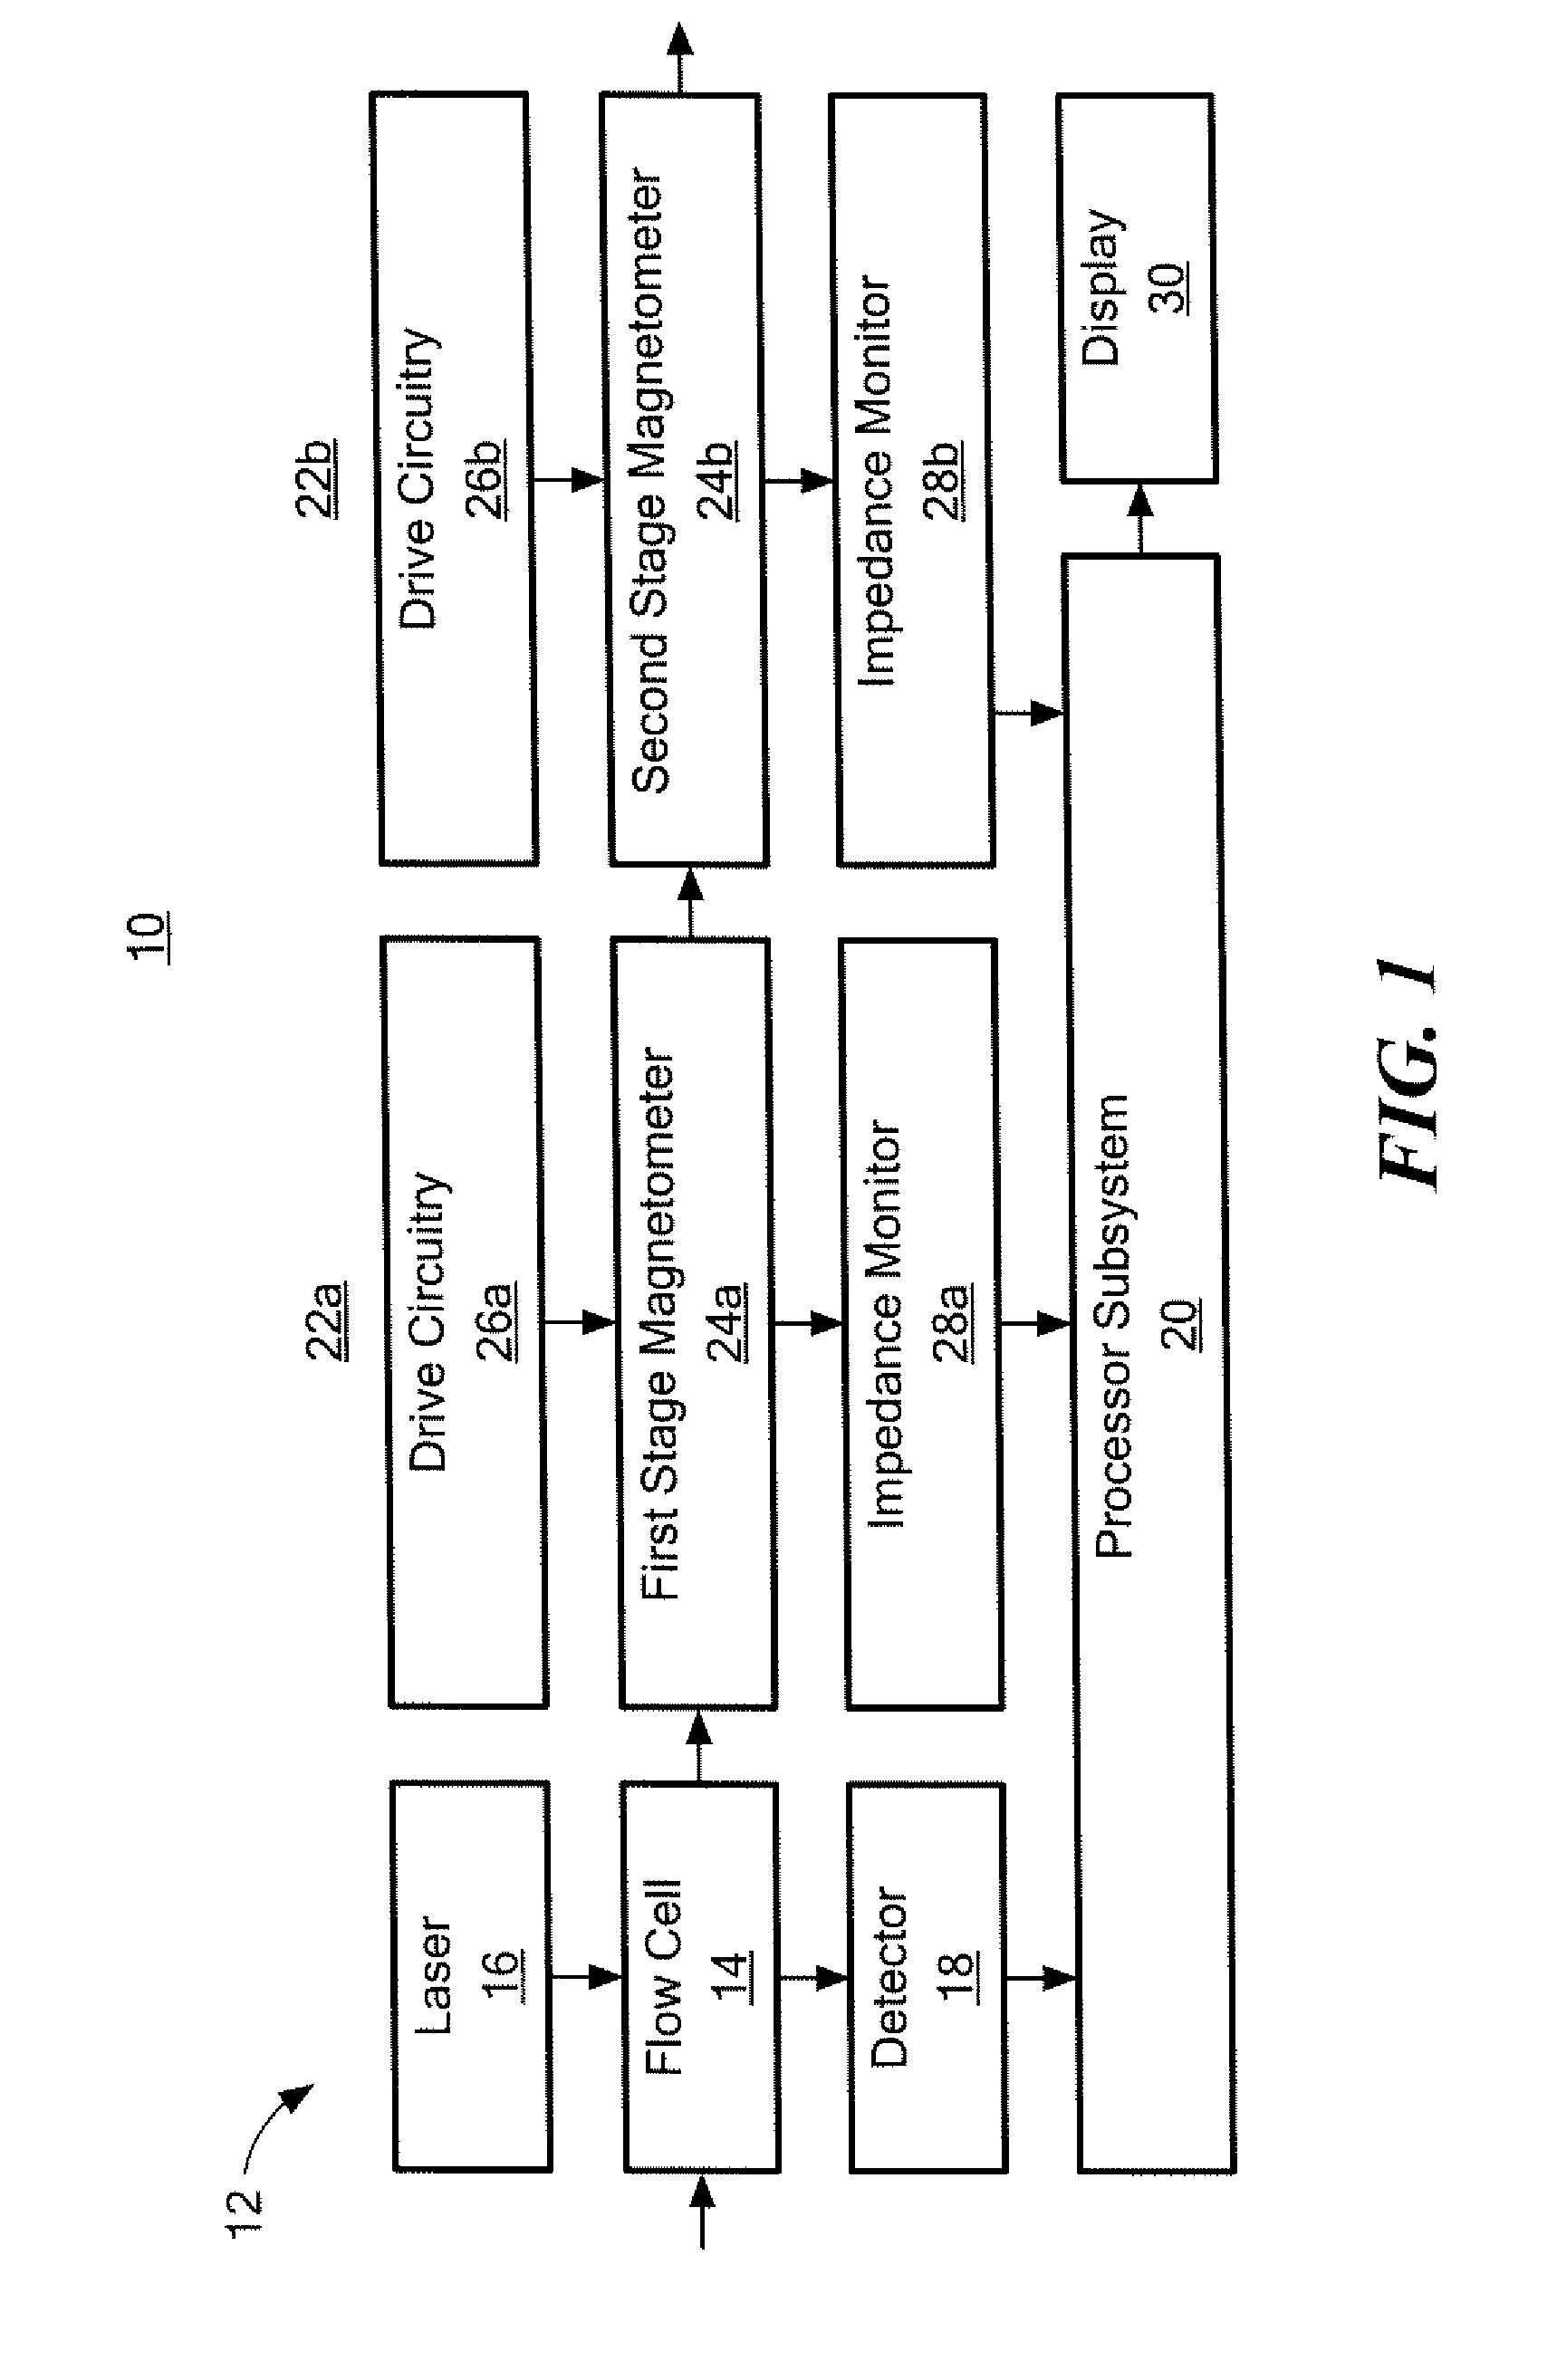 Particle counter and classification system